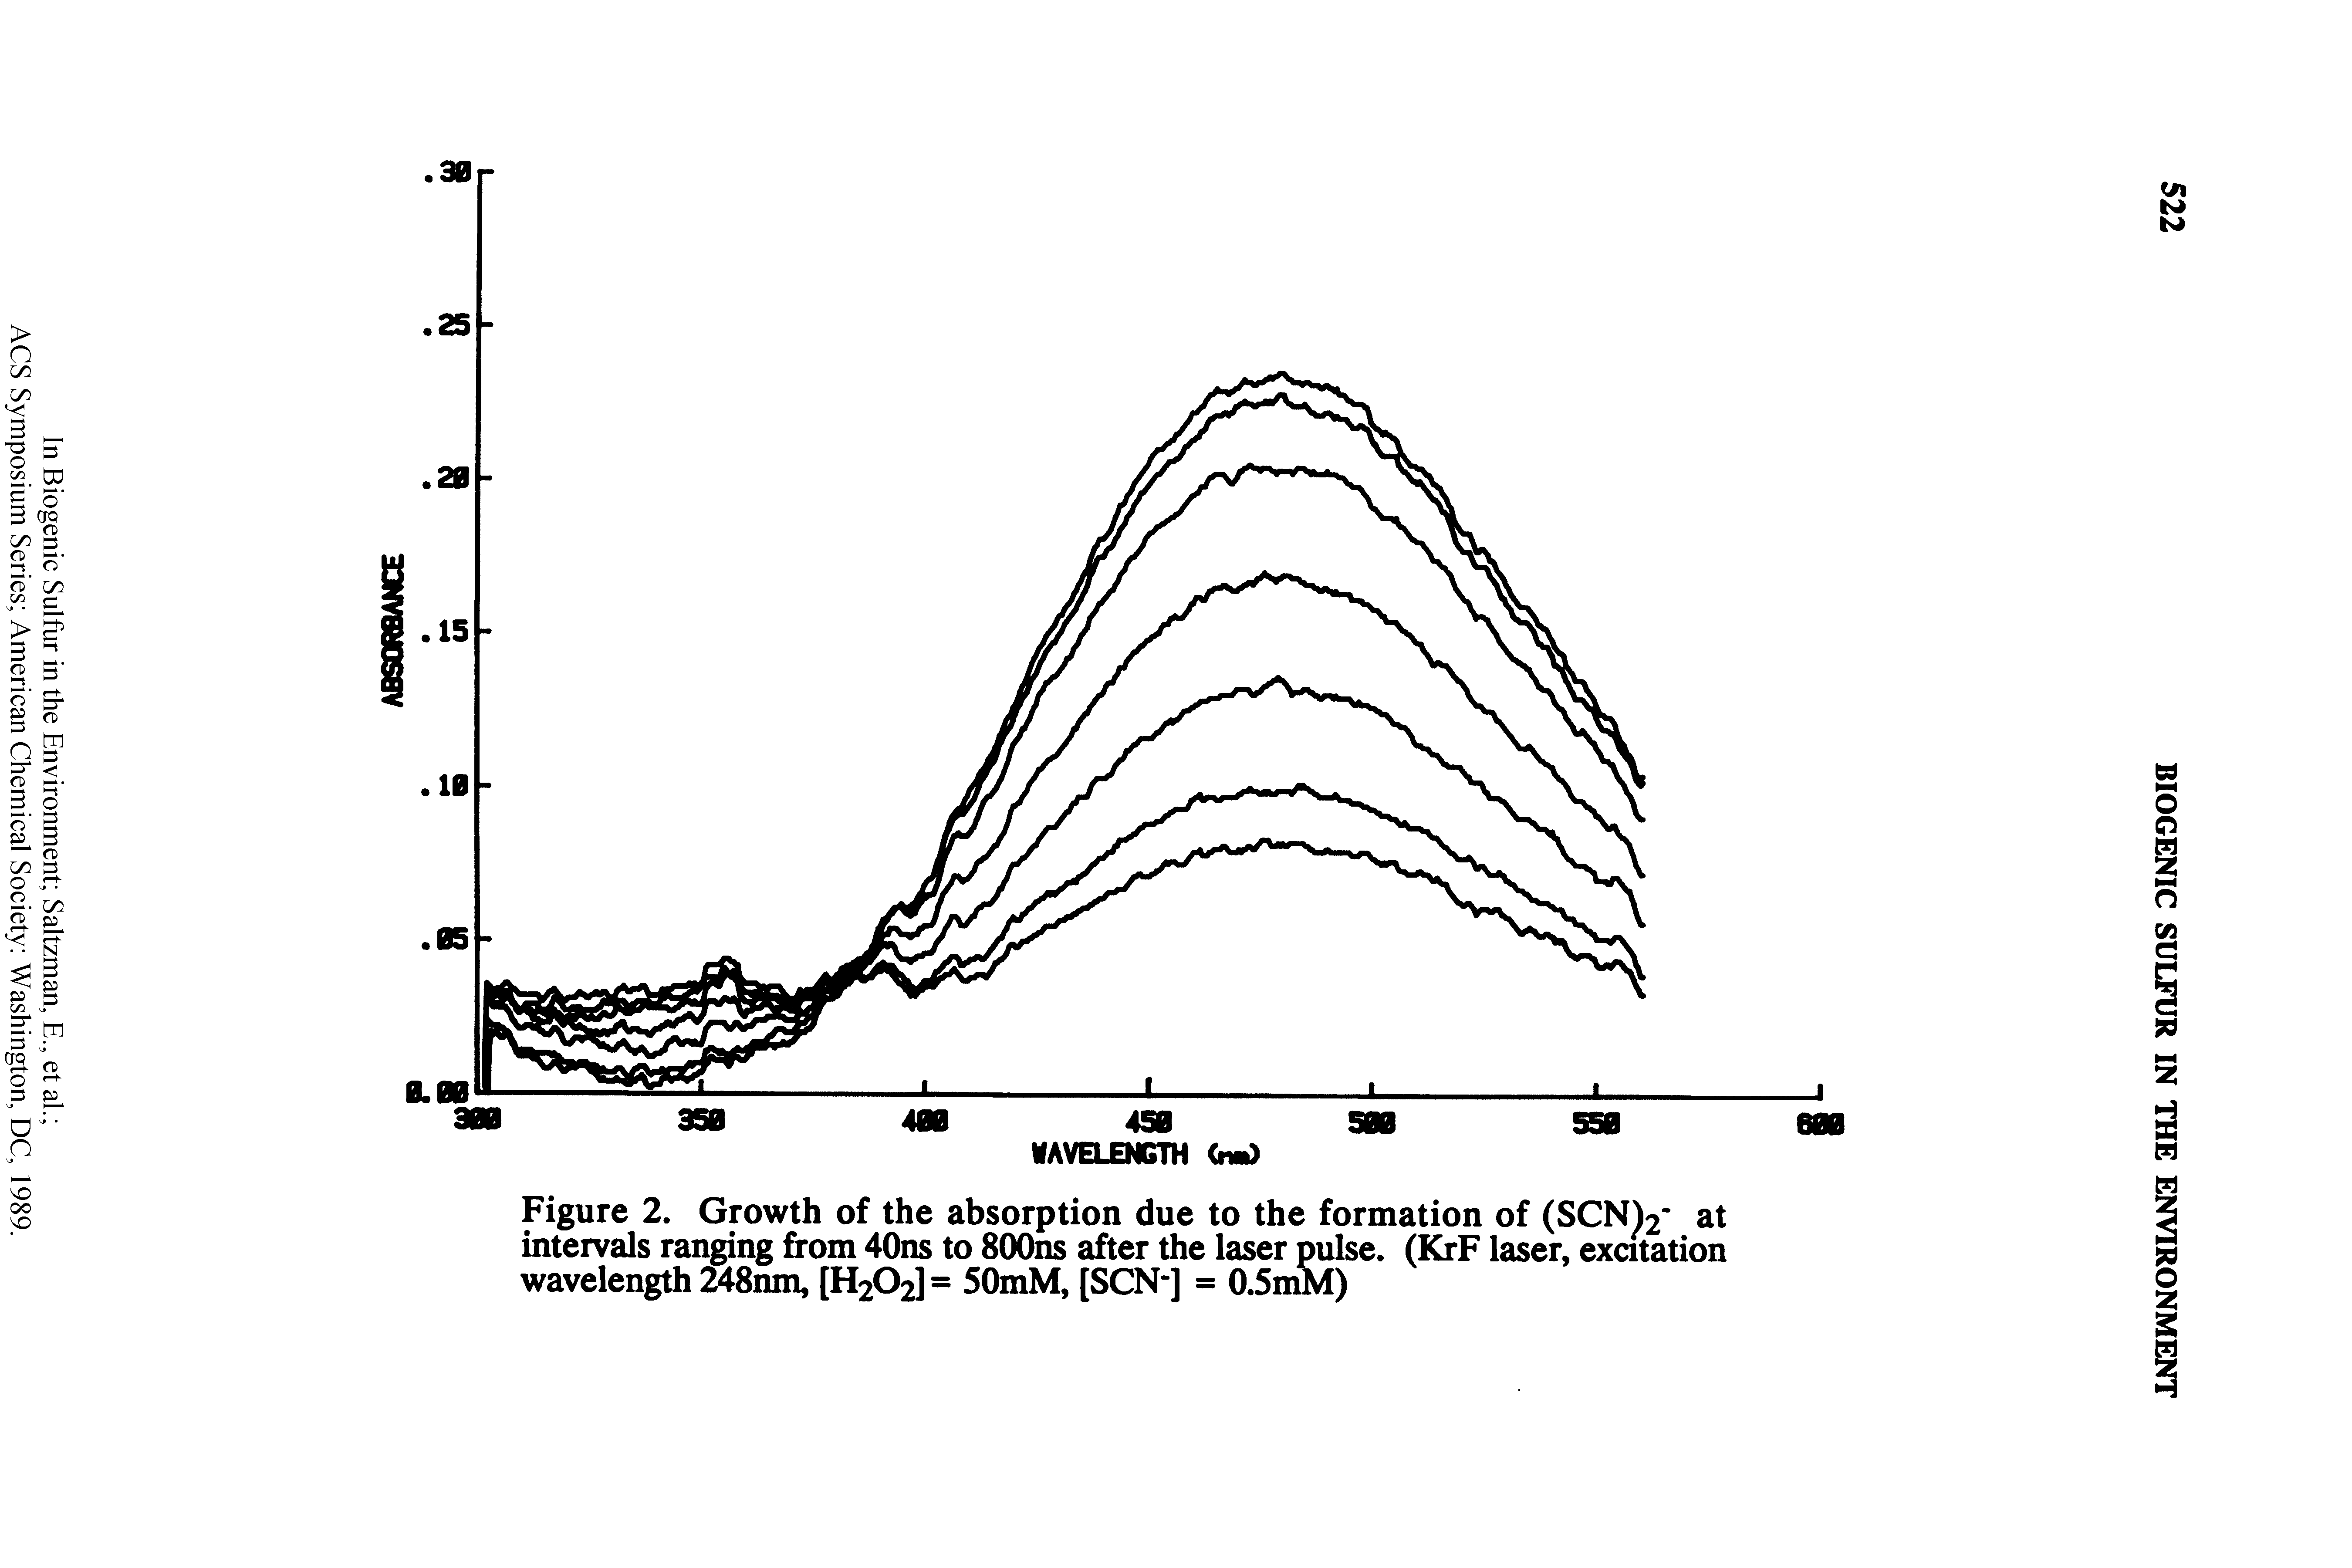 Figure 2. Growth of the absorption due to the formation of (SCNV at intervals ranging from 40ns to 800ns after the laser pulse. (KrF laser, excitation wavelength 248nm, [H202]= 50mM, [SCN-] = 0.5mM)...